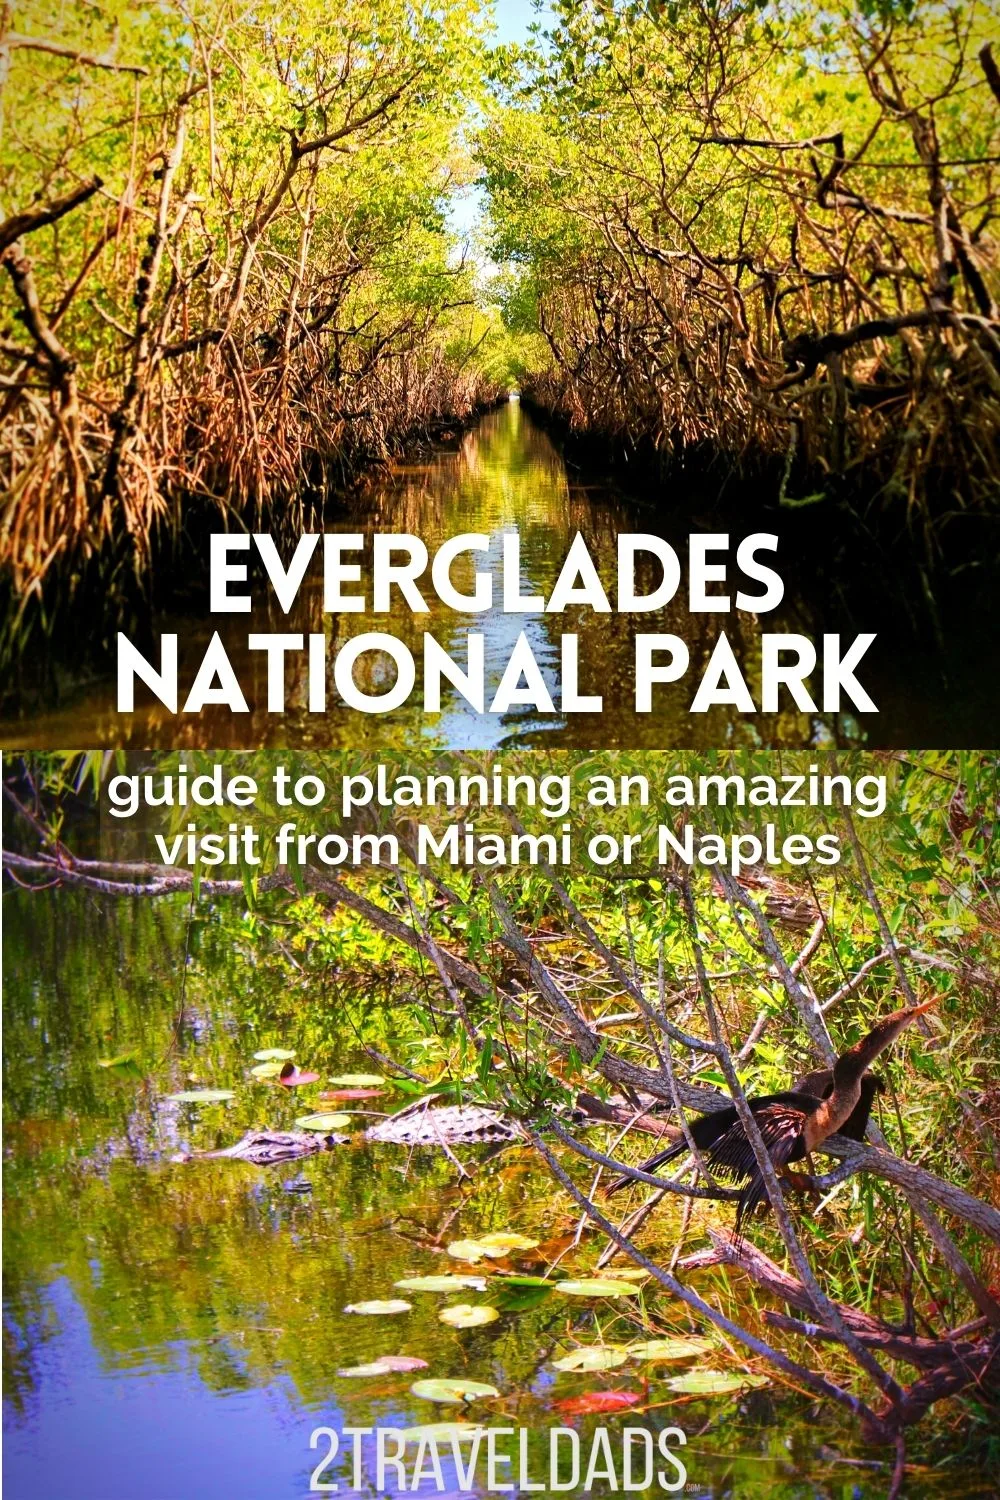 Everglades National Park is one of the most unusual places in the USA. Very near Miami and the Florida Keys, the Everglades is perfect for kayaking, biking, wildlife watching and Florida's famous airboats.